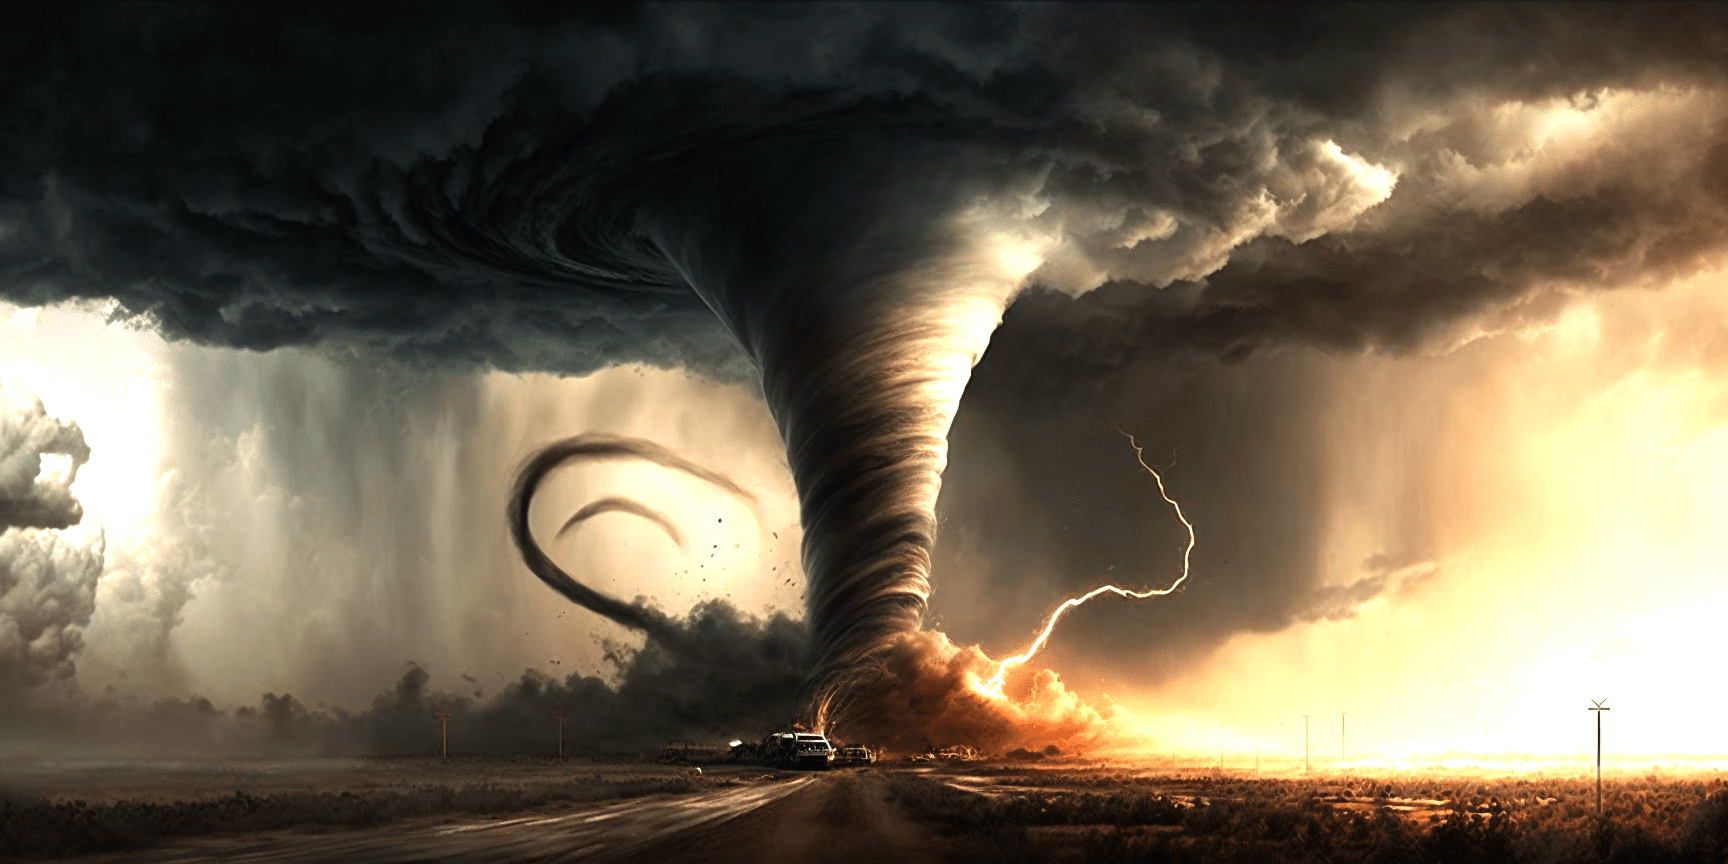 This Tornado Outbreak Will Be Different…